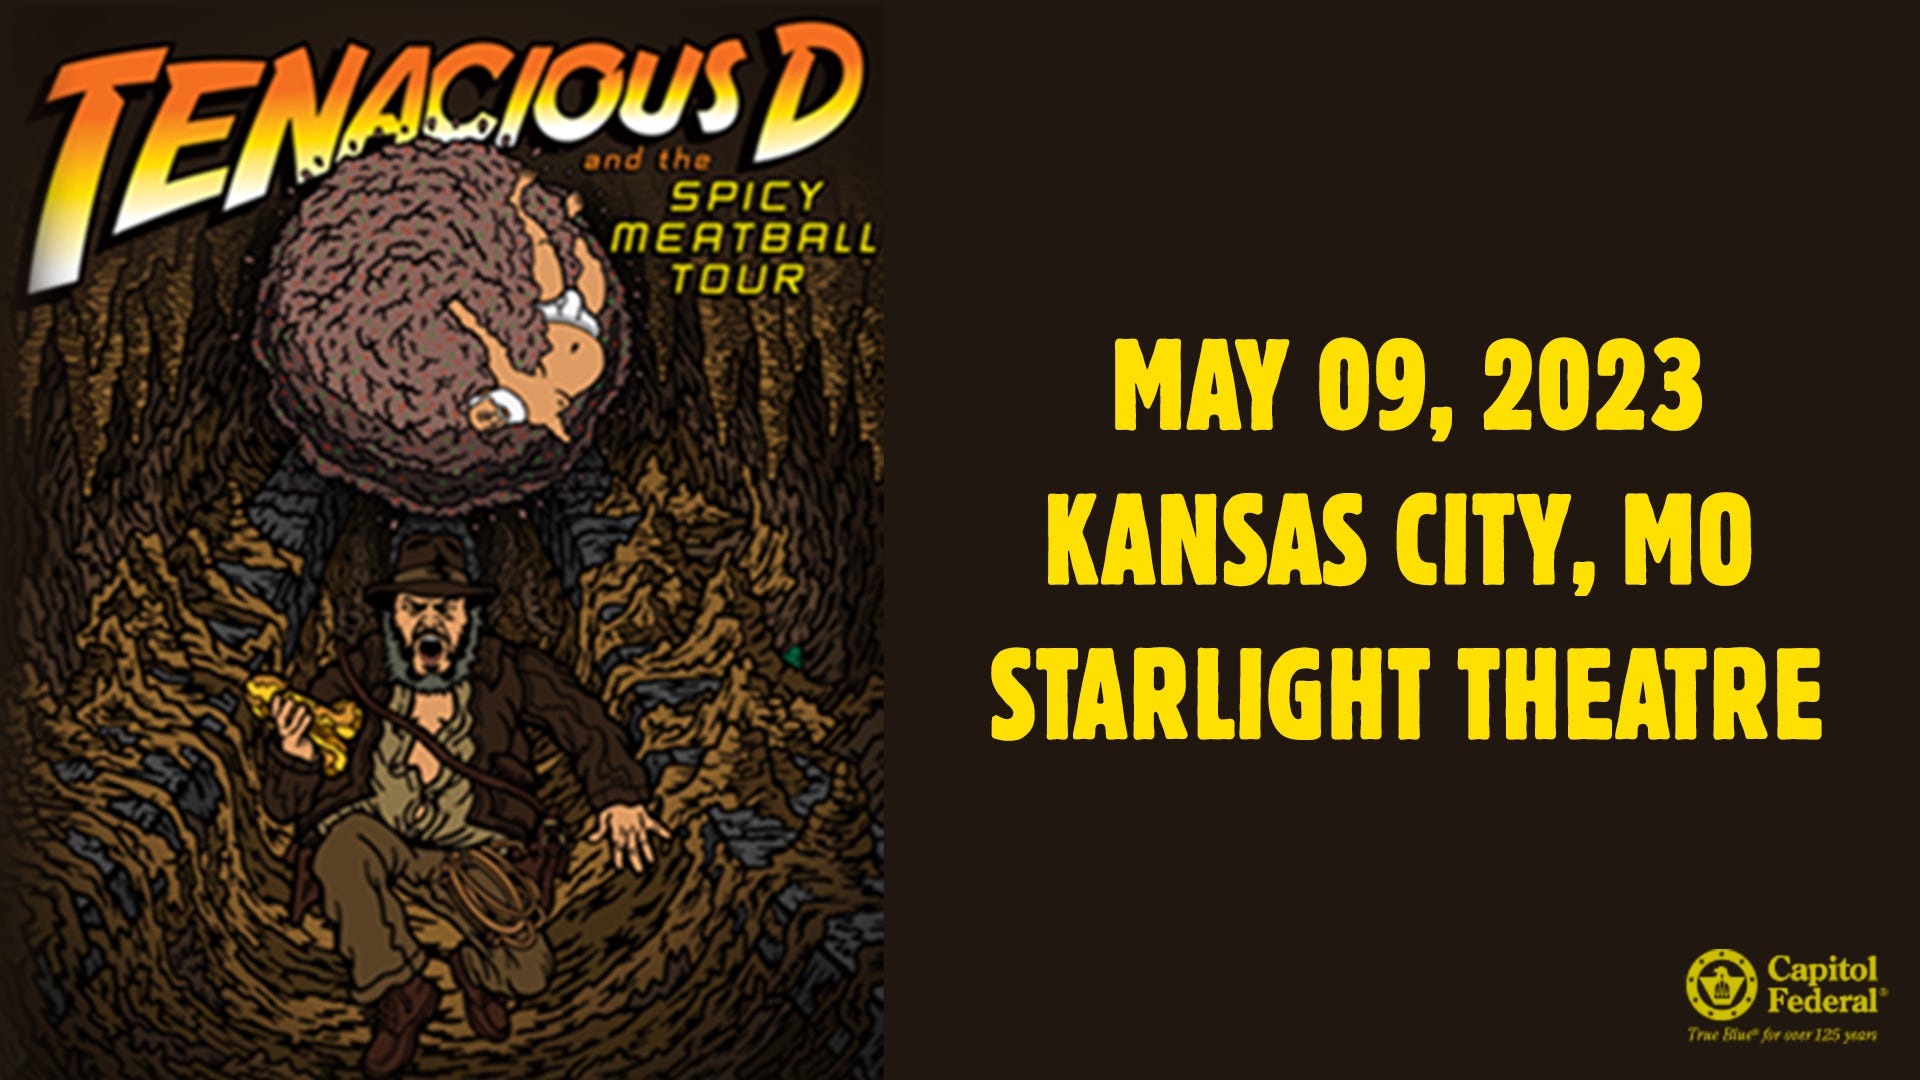 Tenacious D and the Spicy Meatball Tour Cinema Release